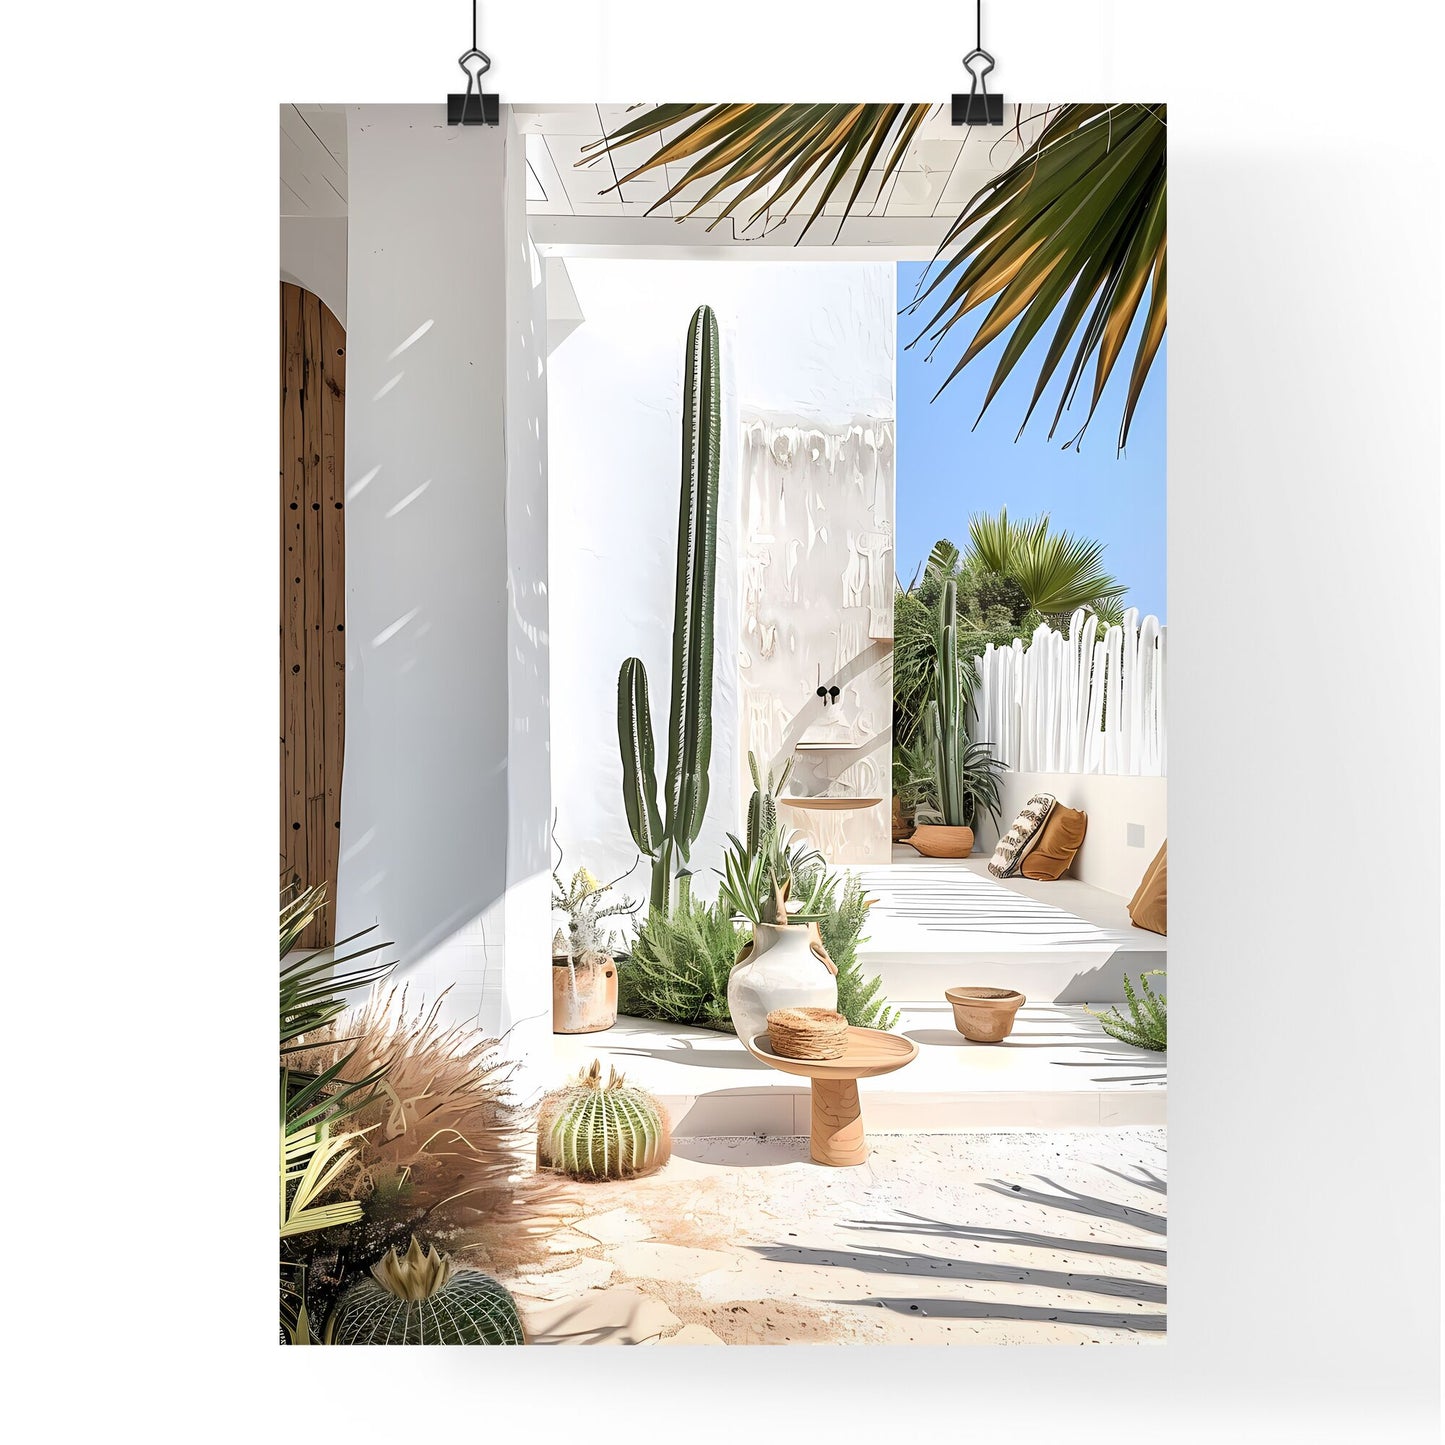 Minimalist Garden Oasis: White Walls, Wooden Accents, Tropical Foliage, Beach House Vibes, Architectural Digest-Worthy Photo Default Title